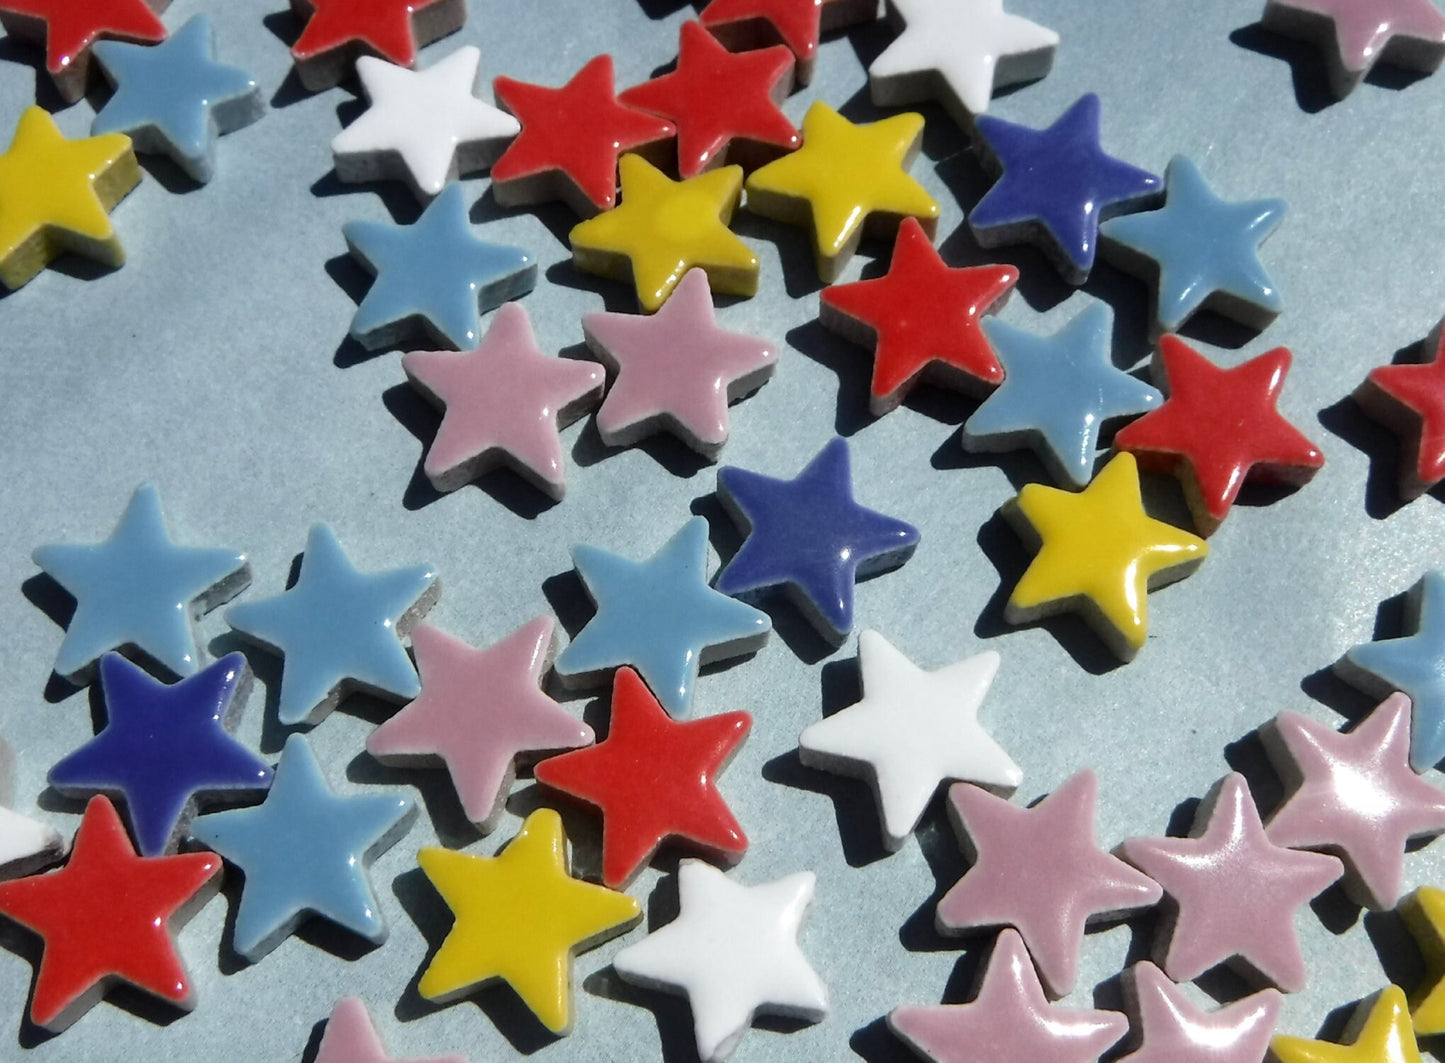 Bright Stars Mosaic Tiles - 50 Ceramic 3/4" Inch Tiles in Assorted Colors